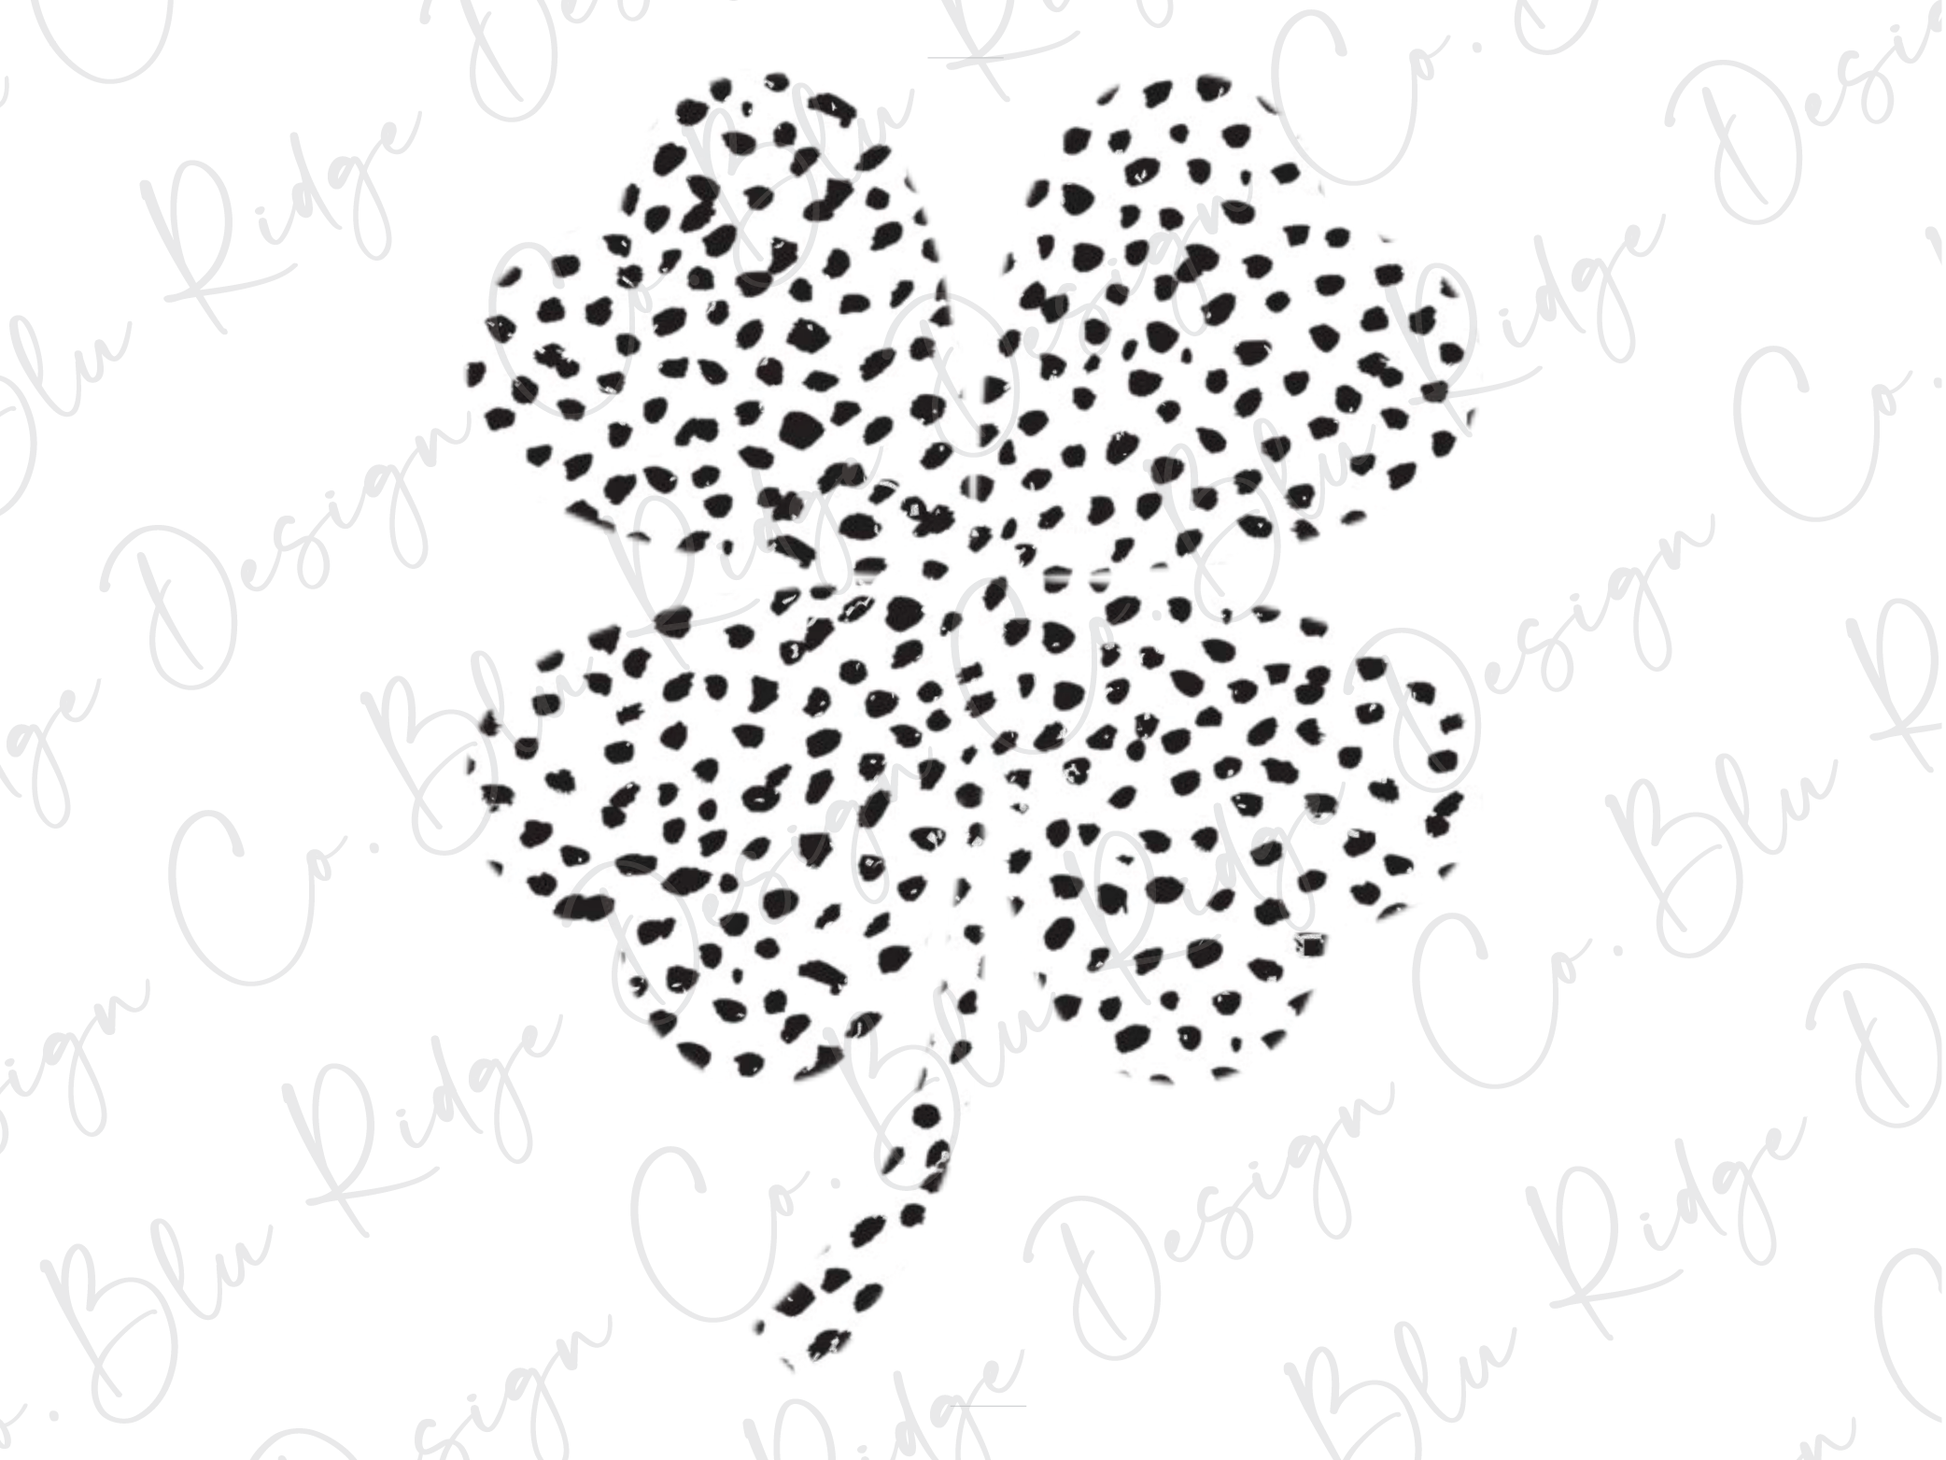 a drawing of a four leaf clover